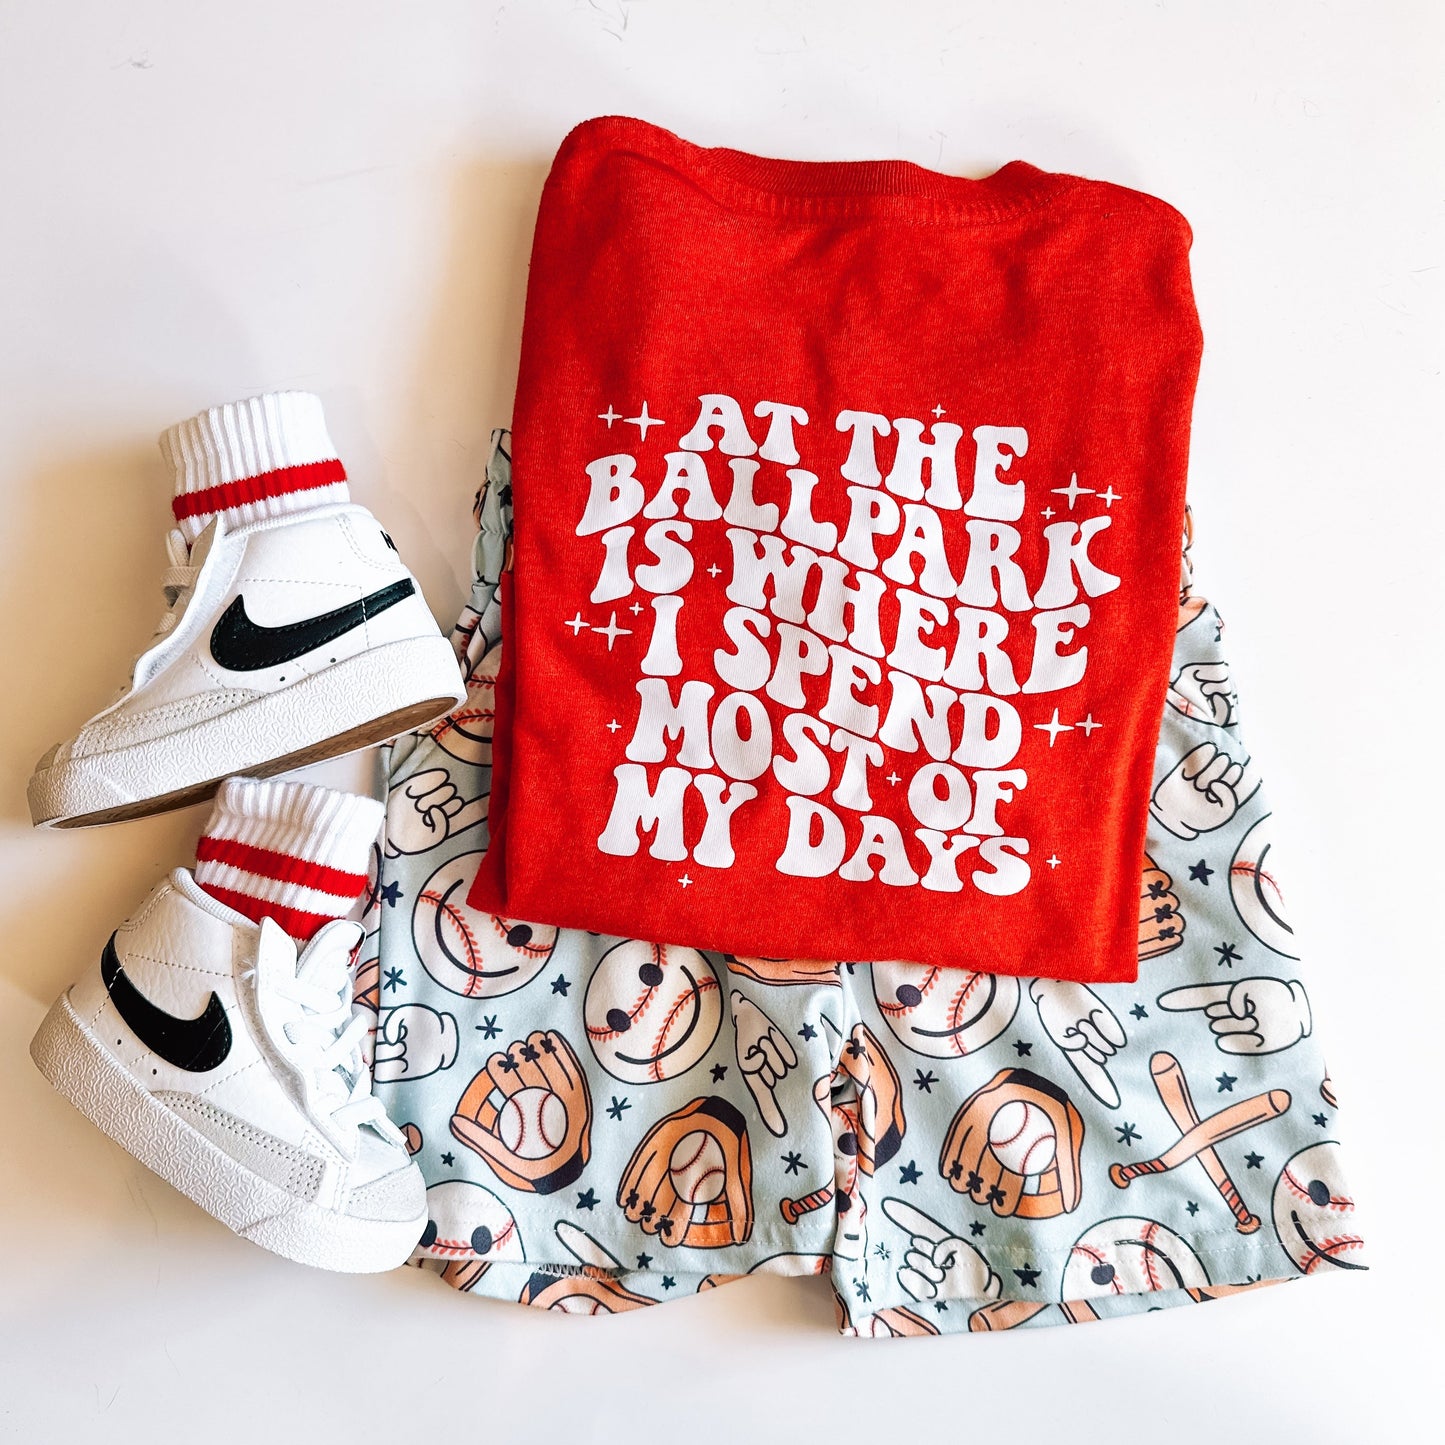 Most of My Days | Vintage Red Graphic T-shirt